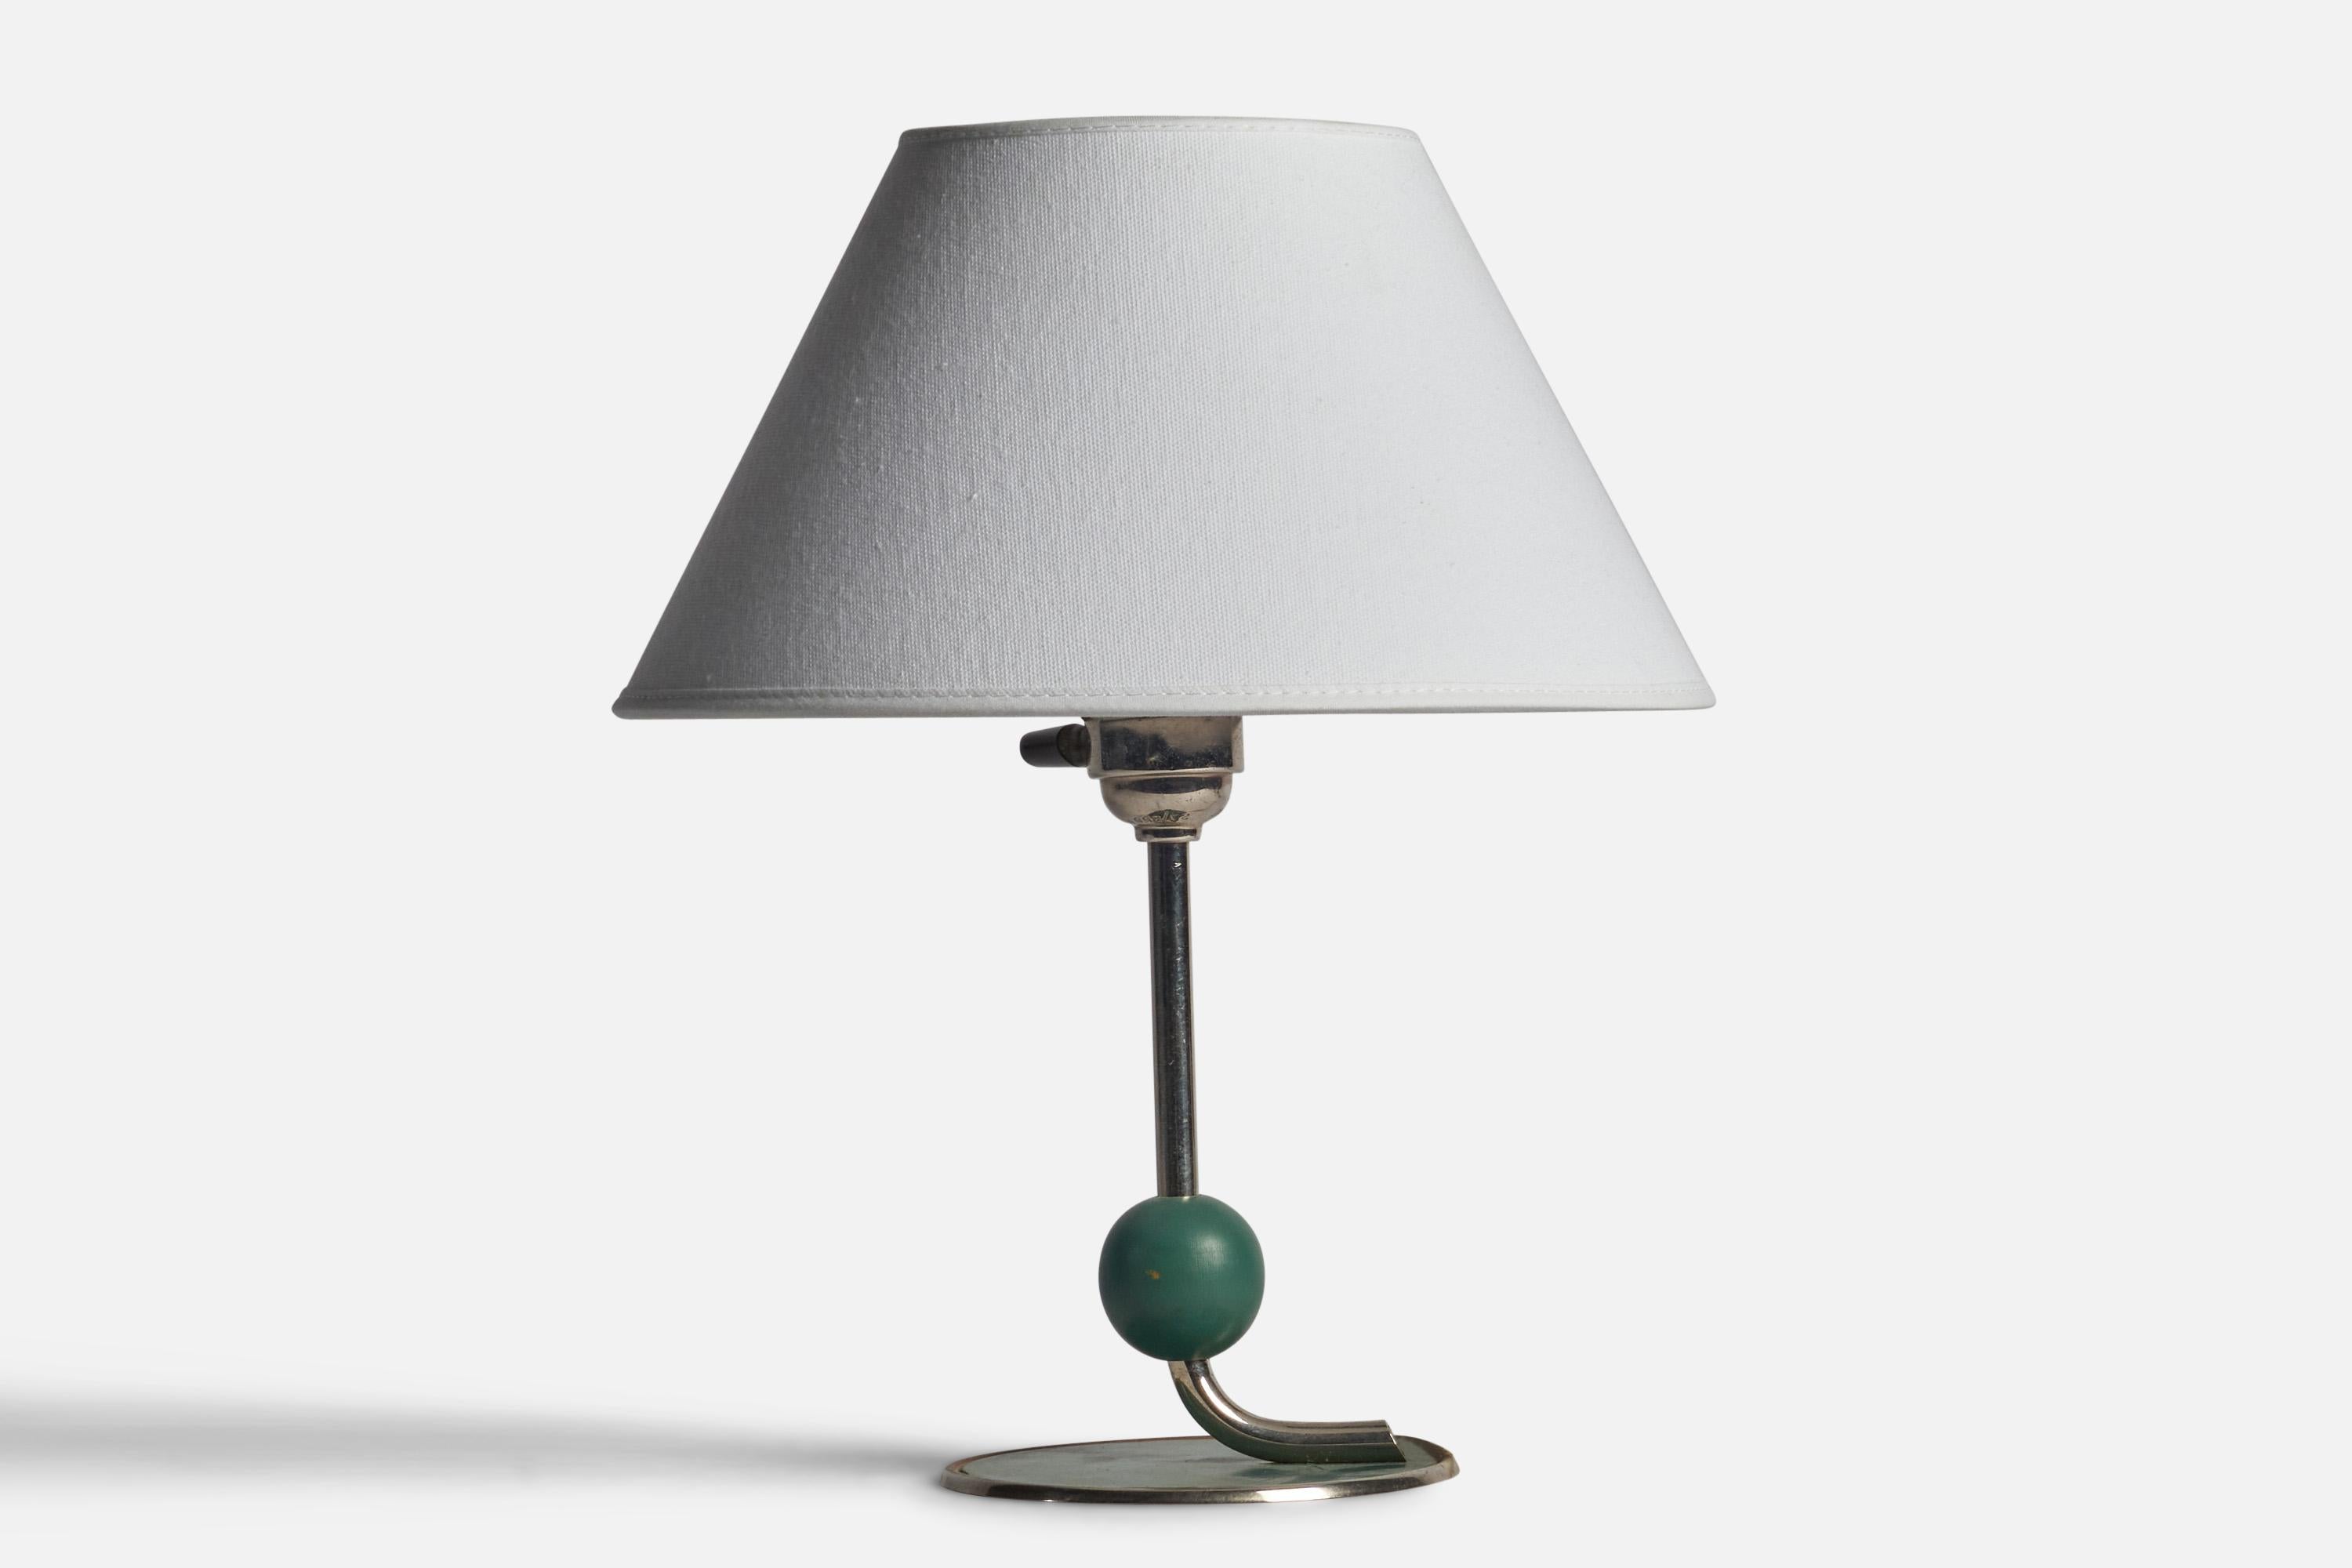 A chrome-plated metal and green-lacquered wood table lamp designed and produced in Sweden, 1930s.

Dimensions of Lamp (inches): 8.5” H x 4.7” Diameter
Dimensions of Shade (inches): 4.5” Top Diameter x 10” Bottom Diameter x 5.25” H 
Dimensions of